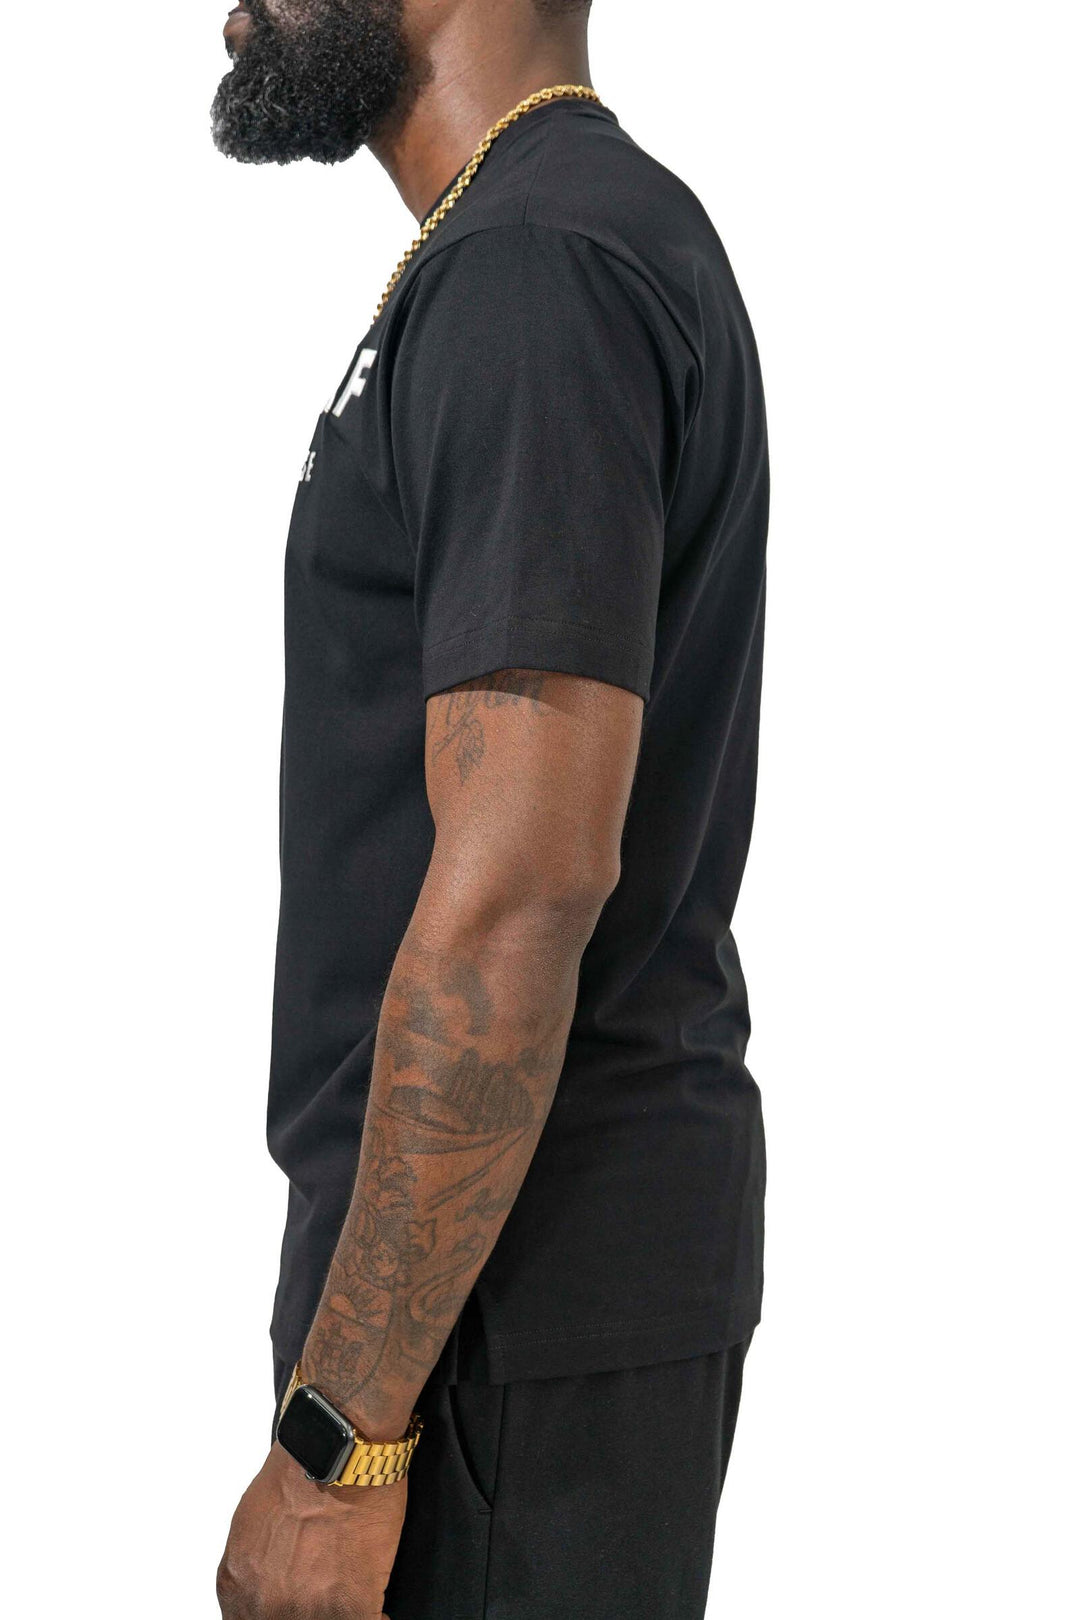 Live With Purpose Essential Black Embroidered Shirt